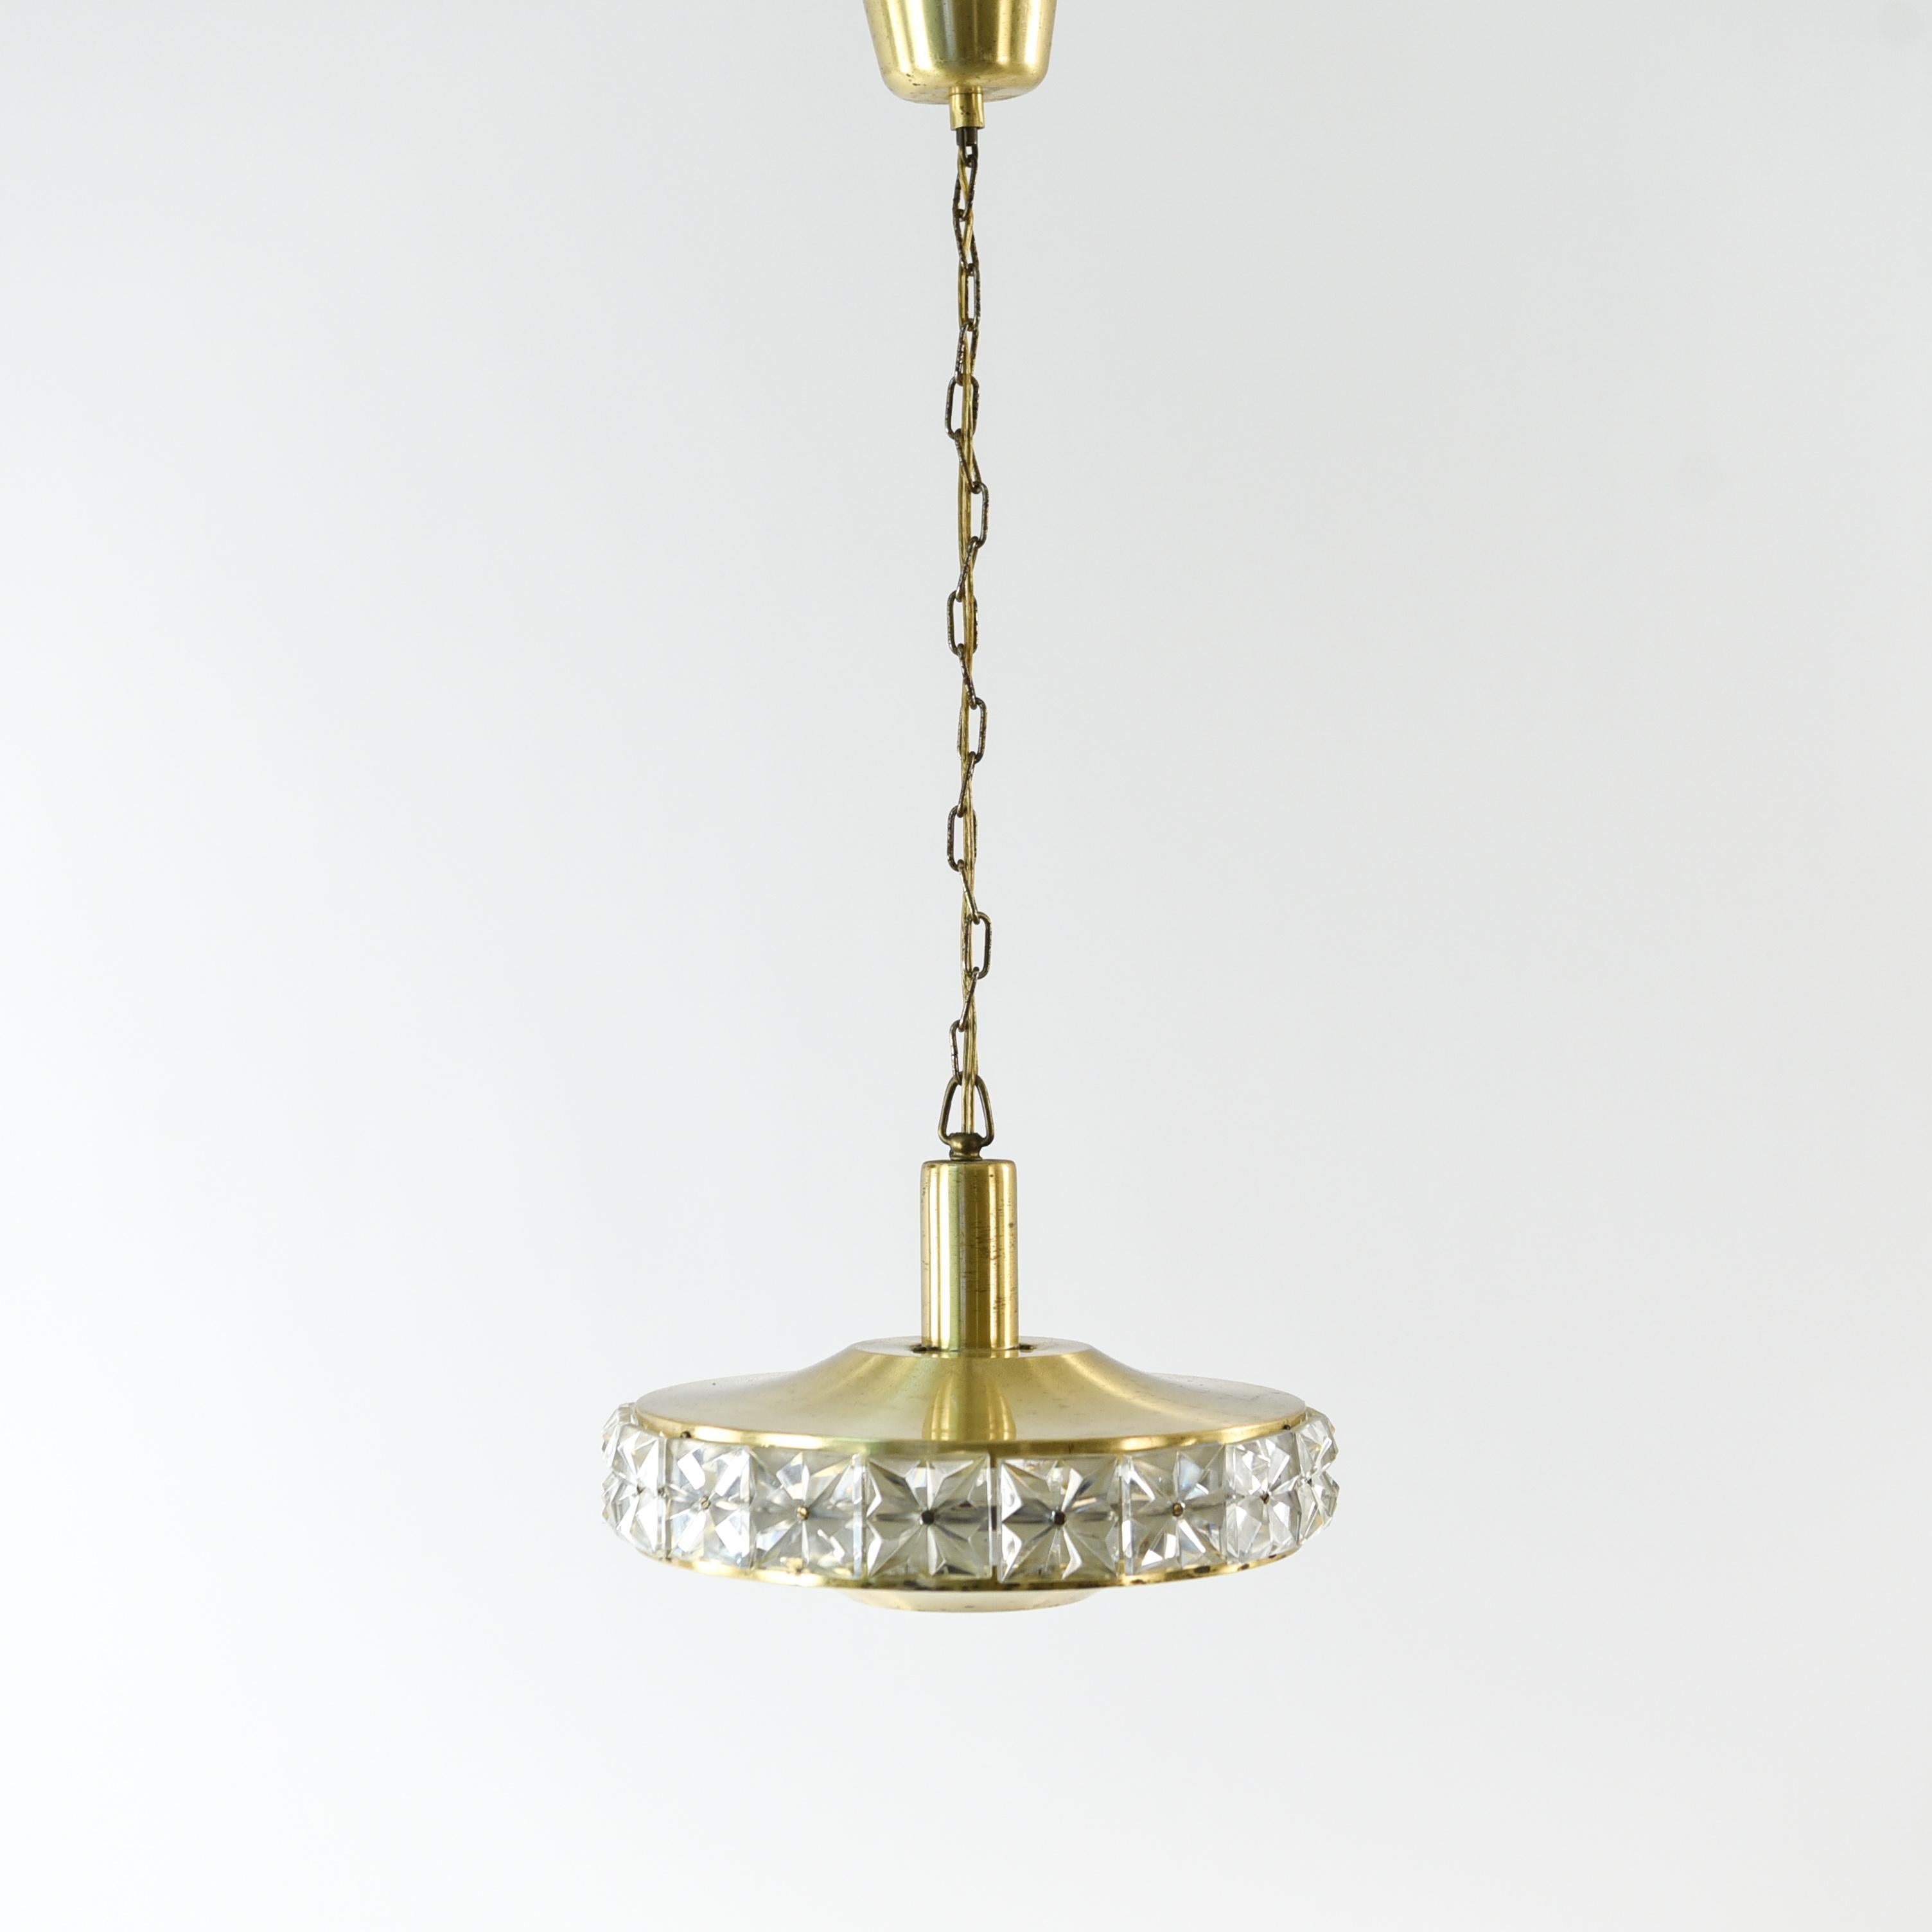 This midcentury crystal and brass pendant chandelier was manufactured and designed by Vitrika in Denmark in the 1960s. Featuring cut crystal panels in a brass framework.